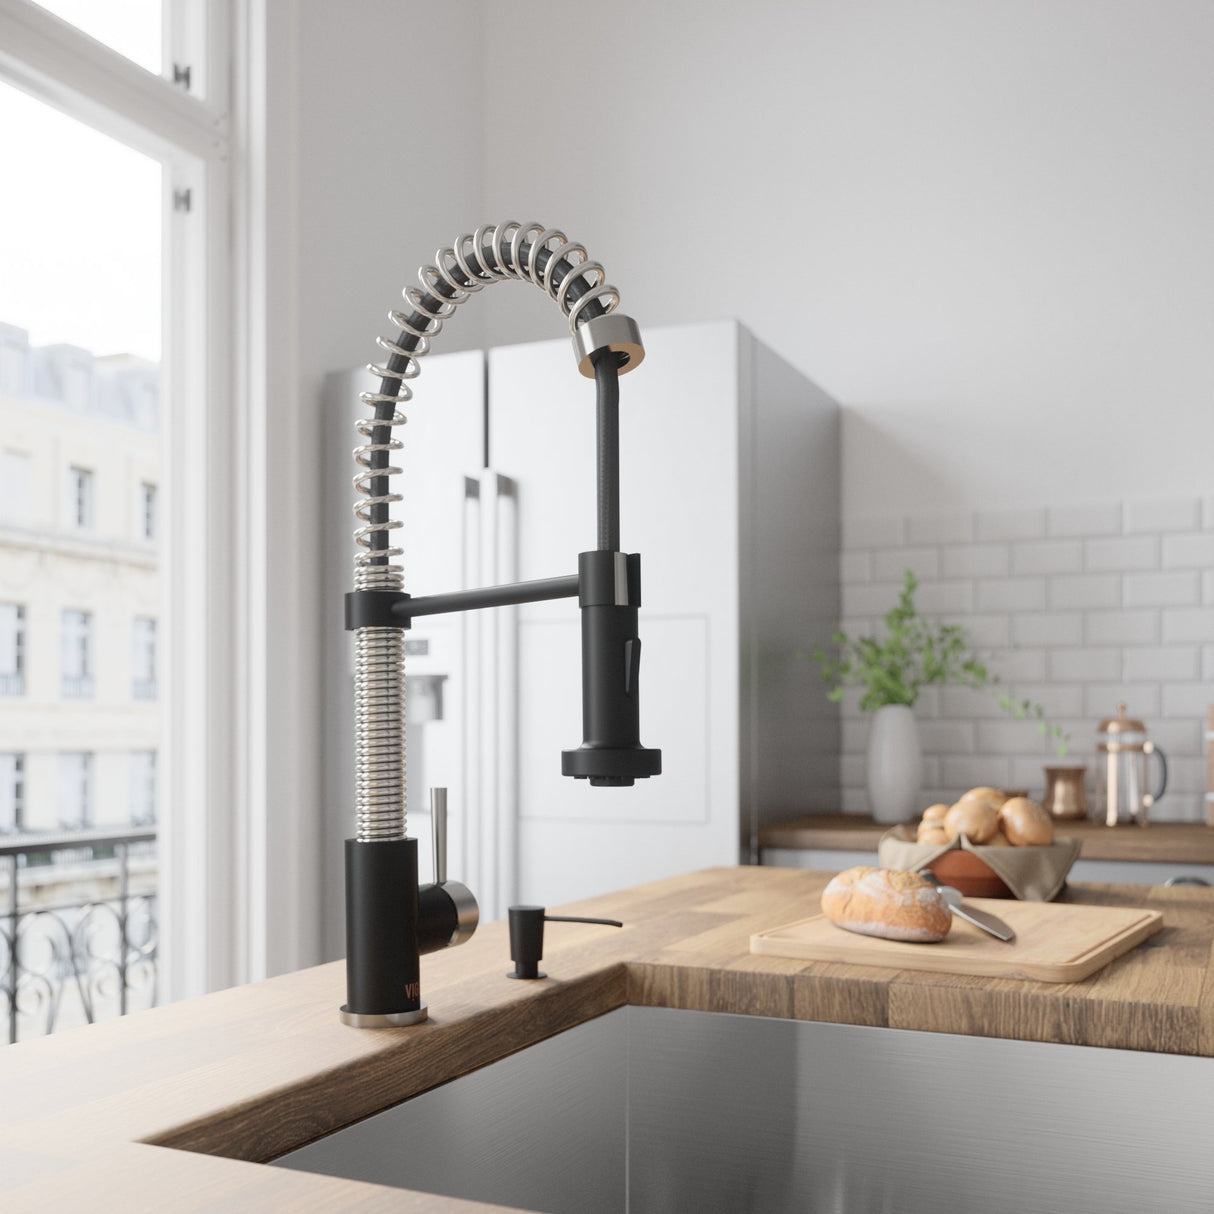 VIGO VG02001STMBK2 19" H Edison Single-Handle with Pull-Down Sprayer Kitchen Faucet with Soap Dispenser in Stainless Steel/Matte Black